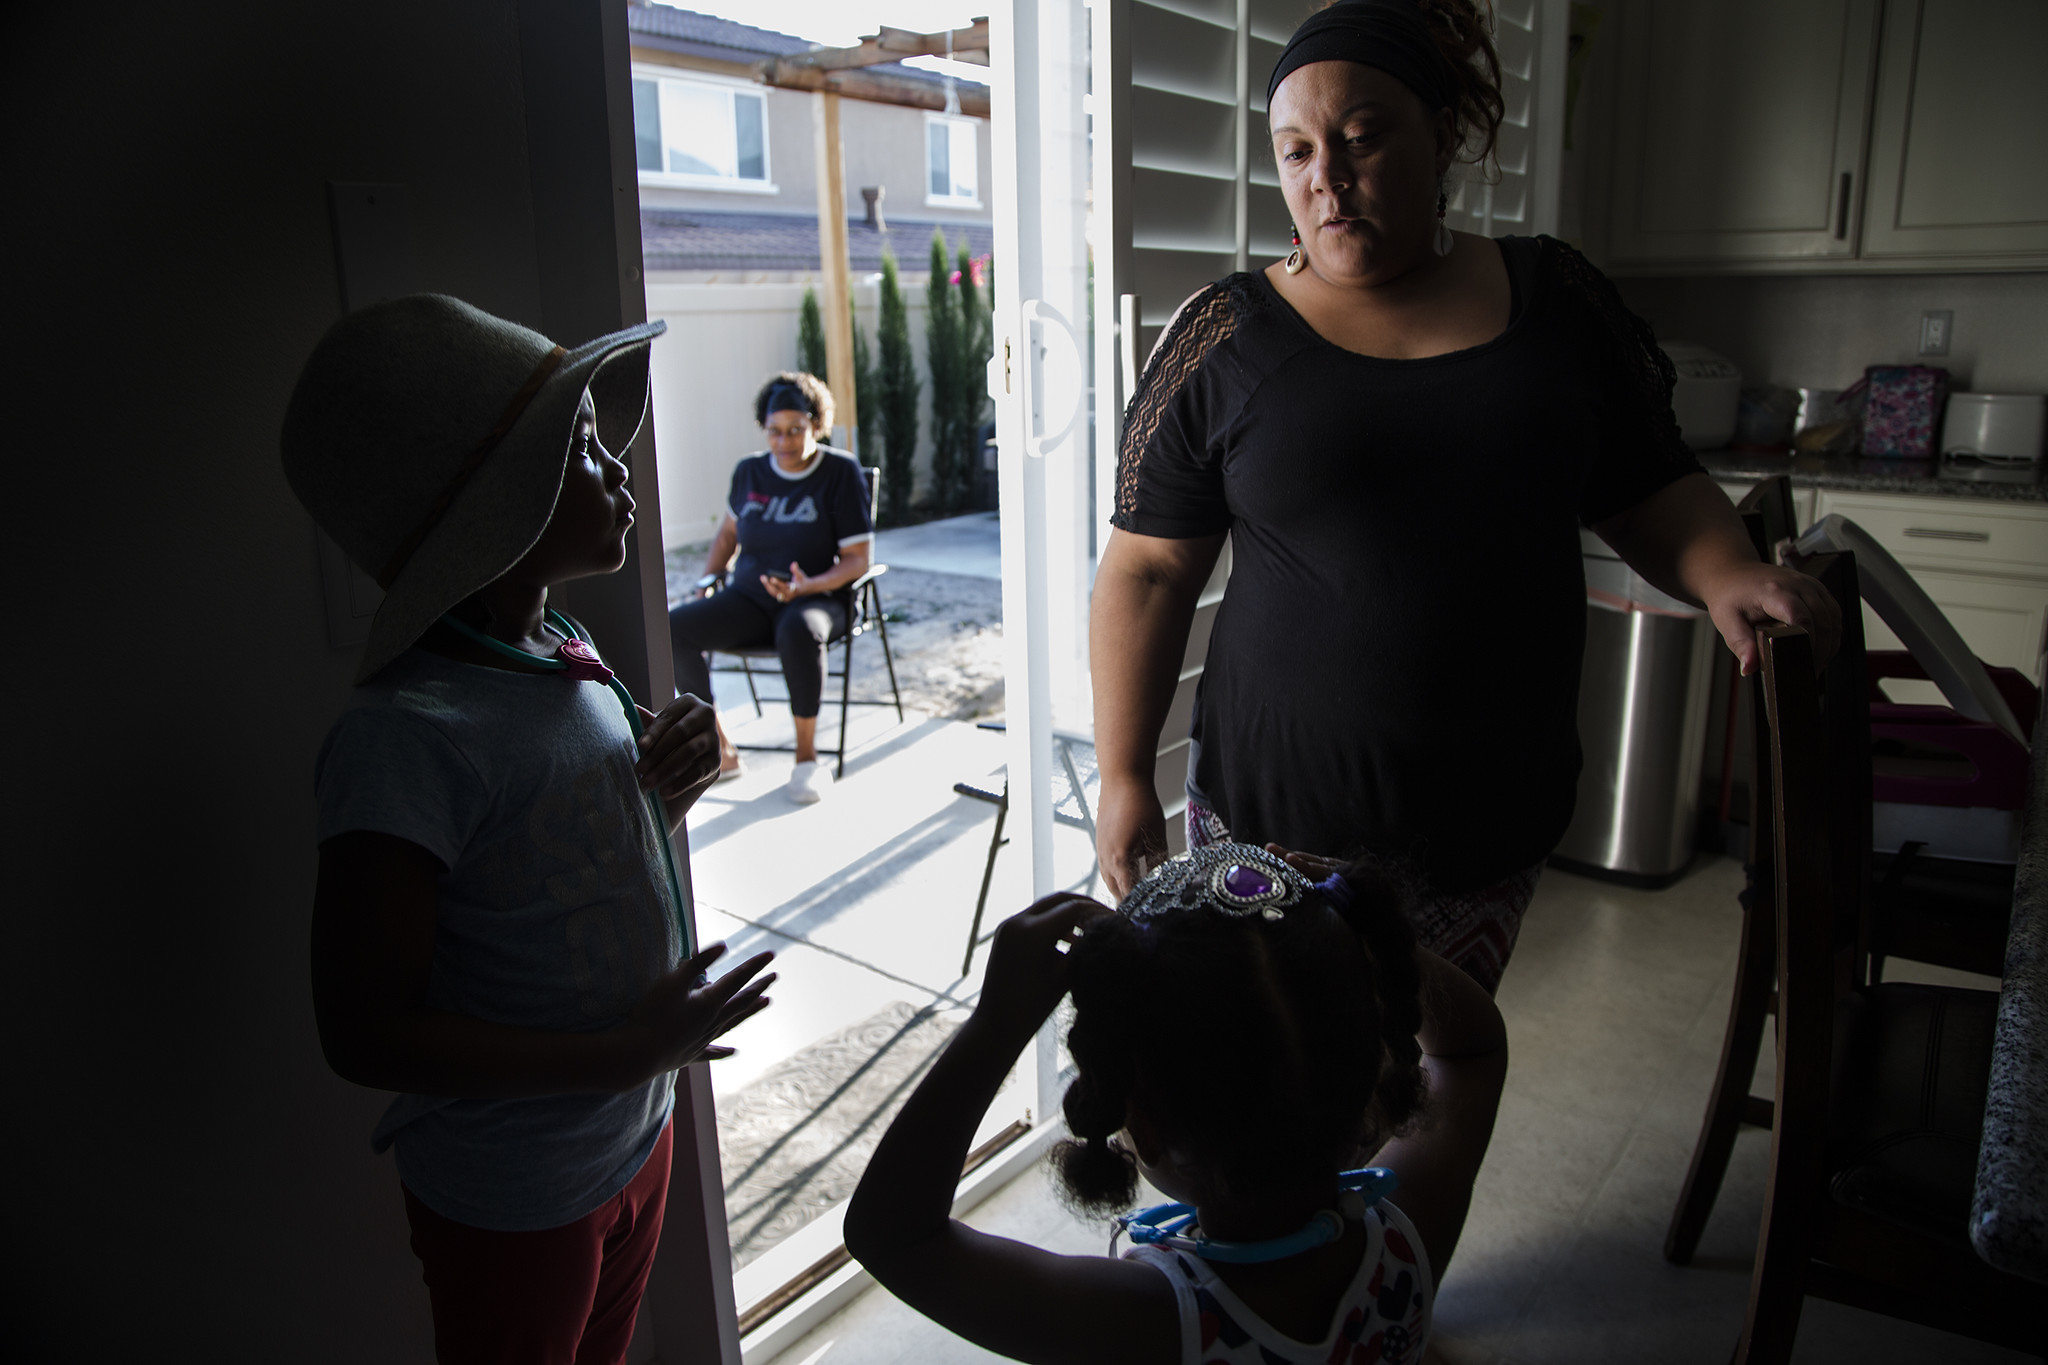 Housing manager Erica Wilson, right, spends time with Leana Wilson, 6, left, and Brooklyn Jackson, 3, before dinner at a transitional home in Eastvale that serves former offenders.